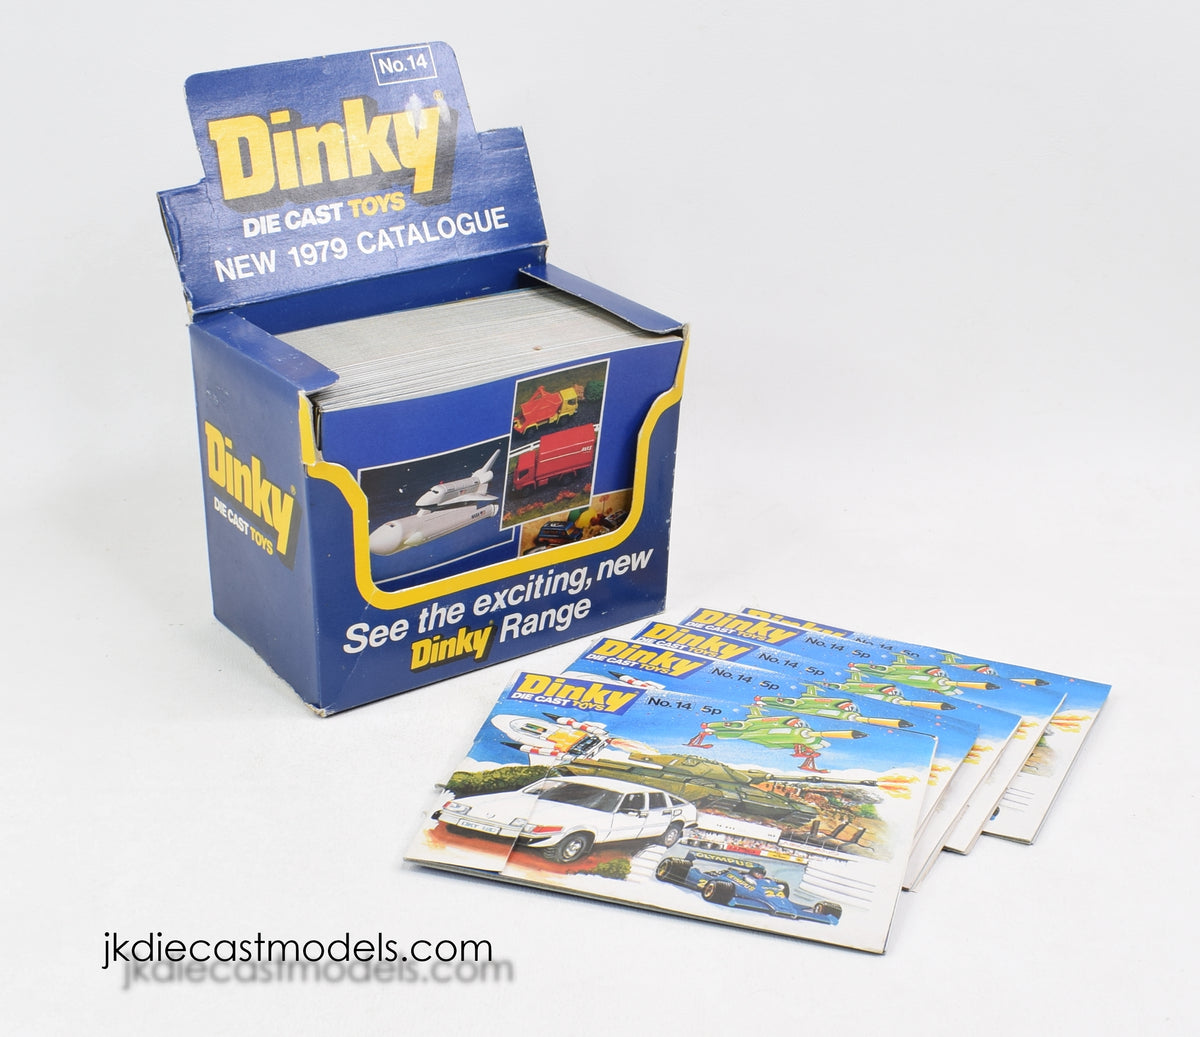 Dinky 50 x 1979 catalogues in counter top dispenser 'Cricklewood Collection'